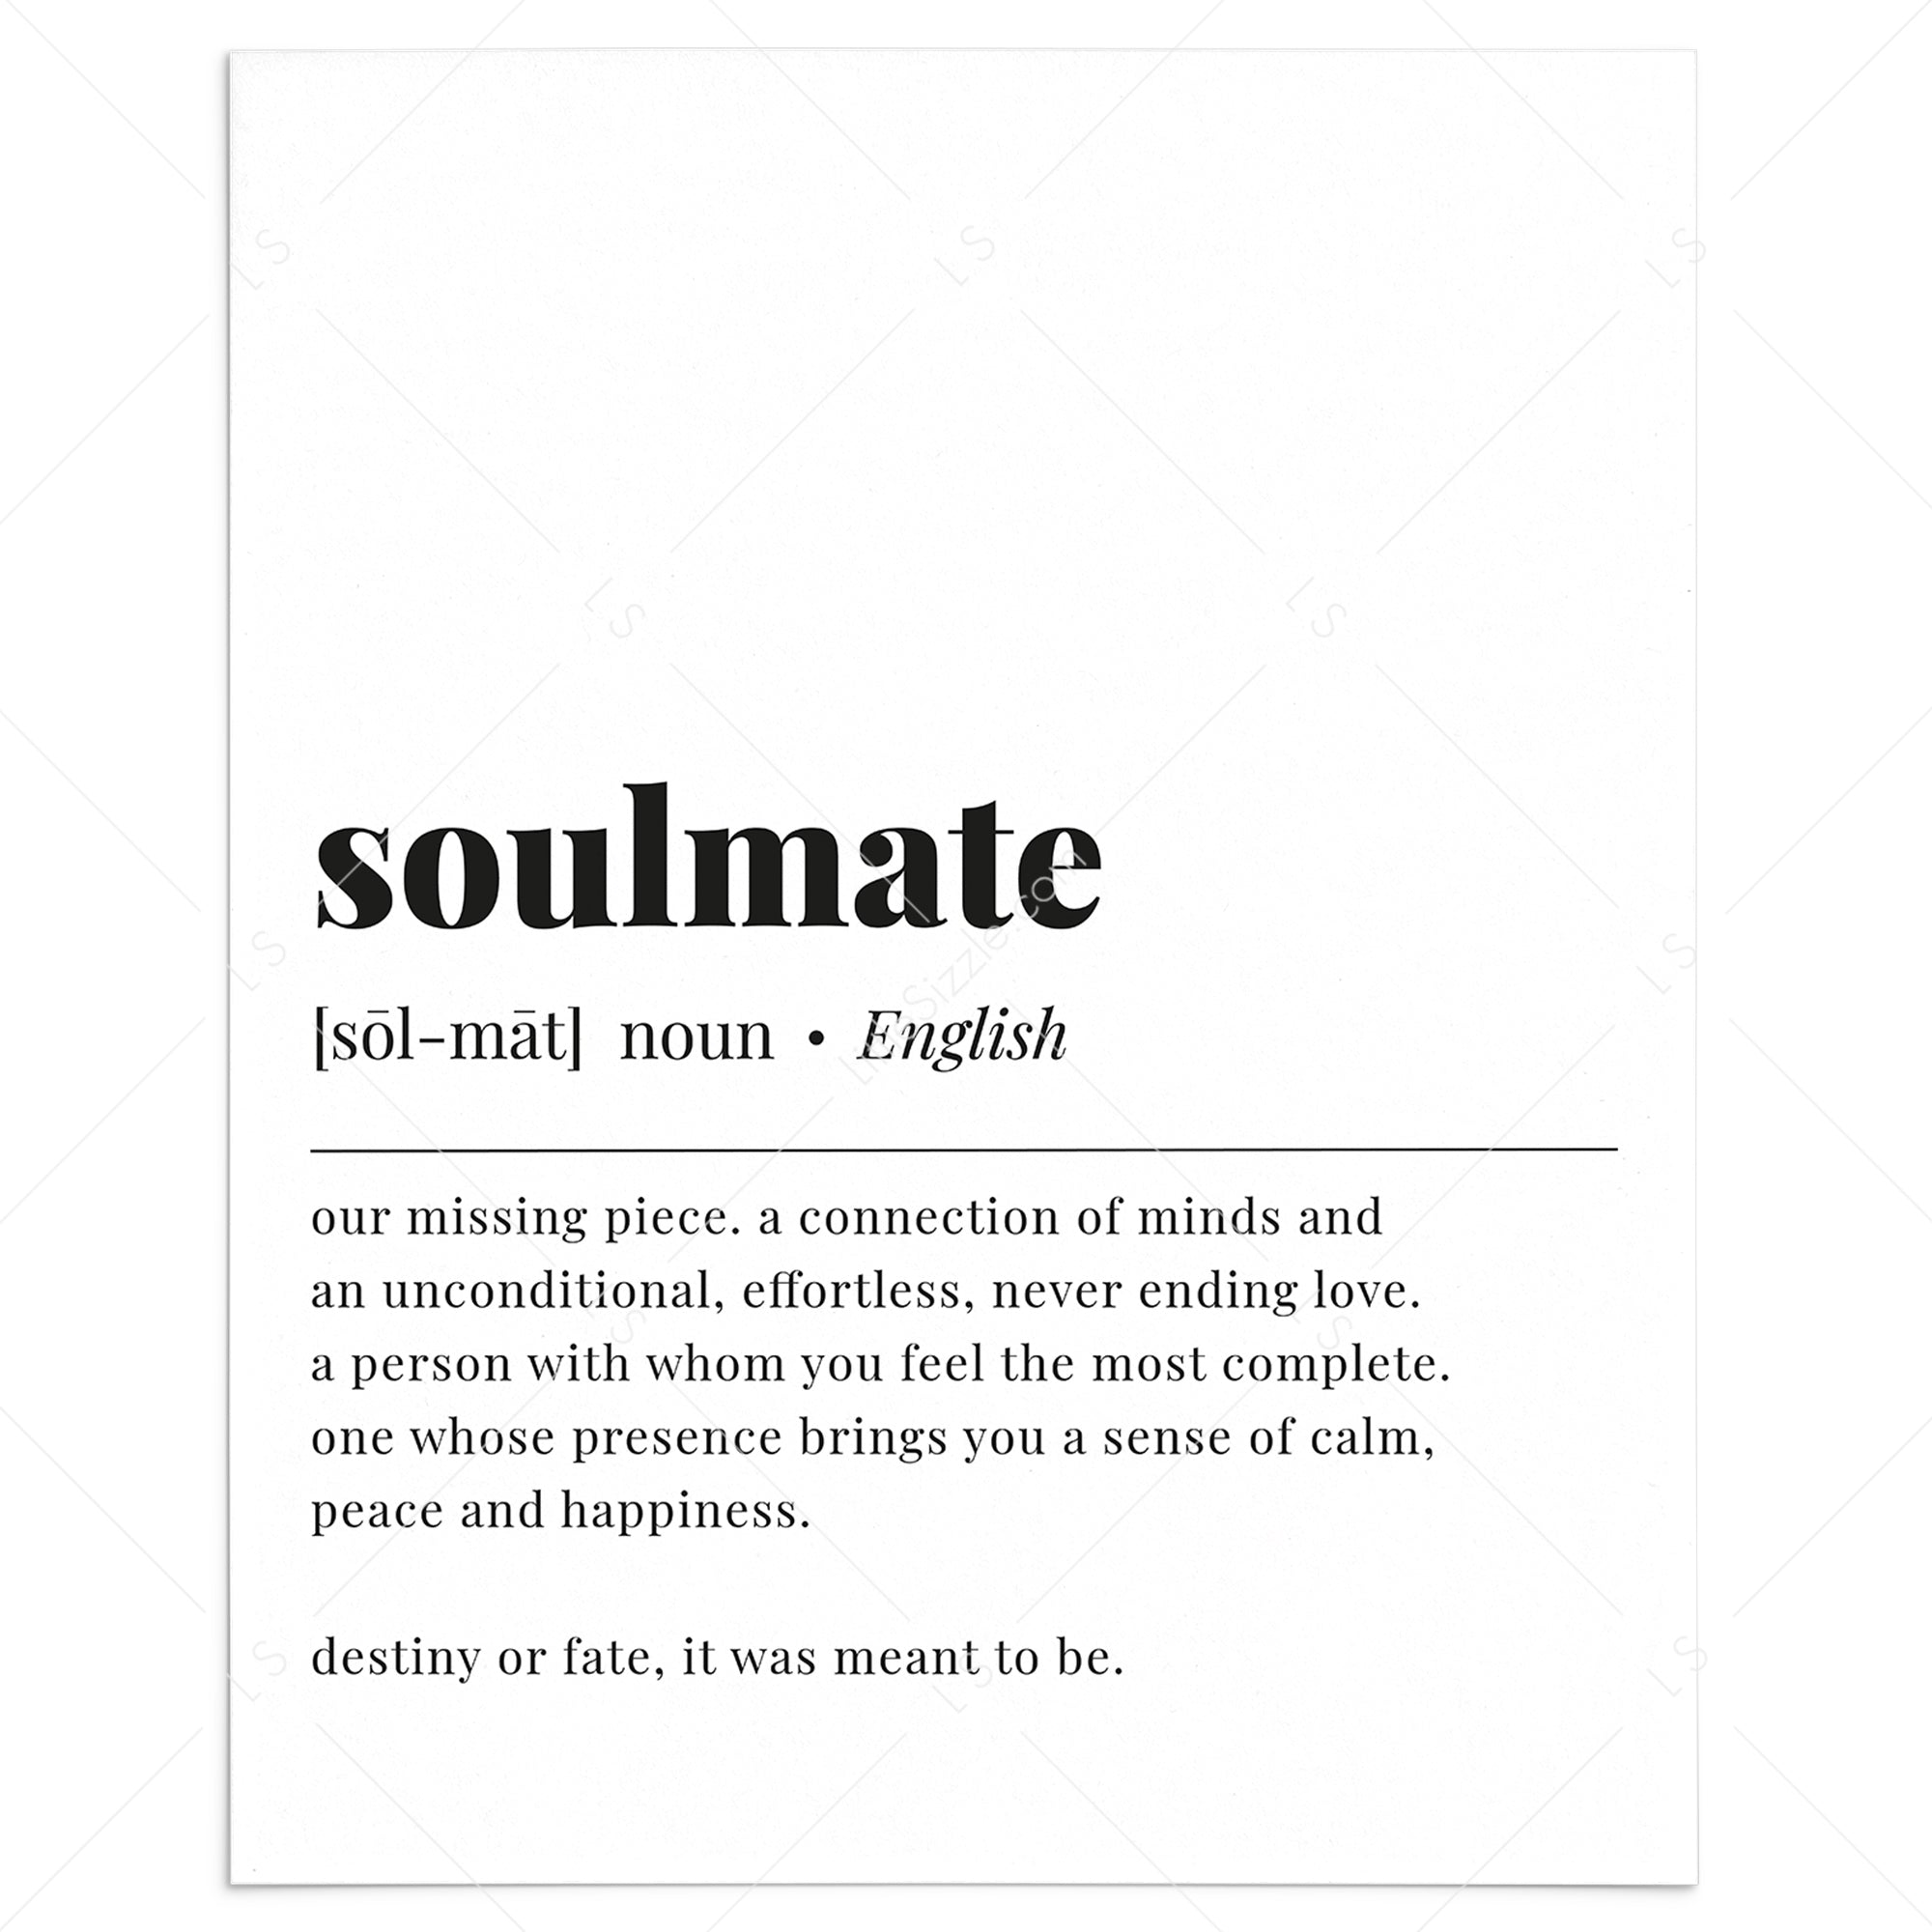 Soulmate Definition Printable by LittleSizzle